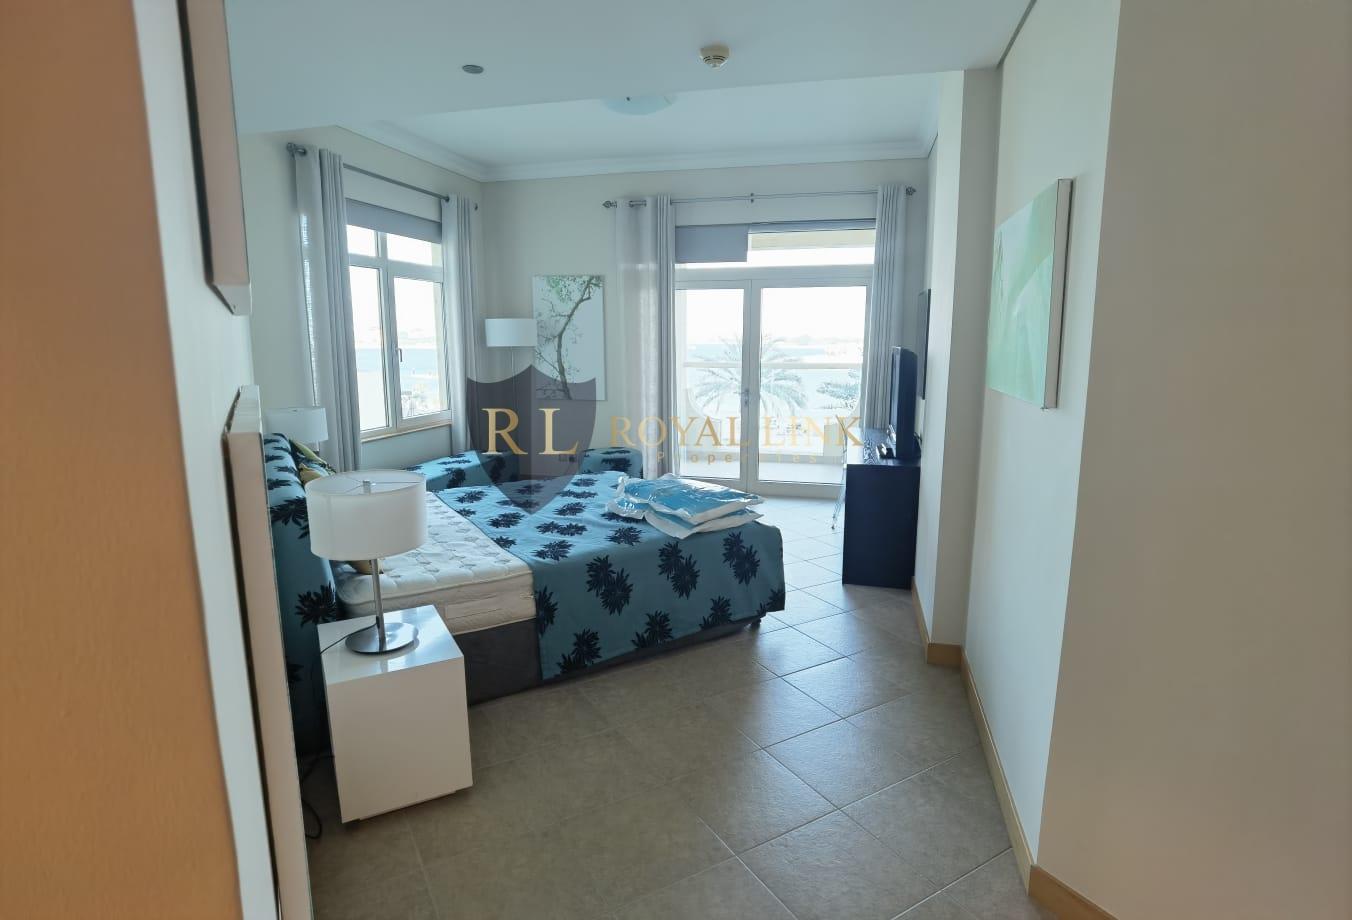 2 bed, 3 bath Apartment for rent in Al Das, Shoreline Apartments, Palm Jumeirah, Dubai for price AED 204999 yearly 